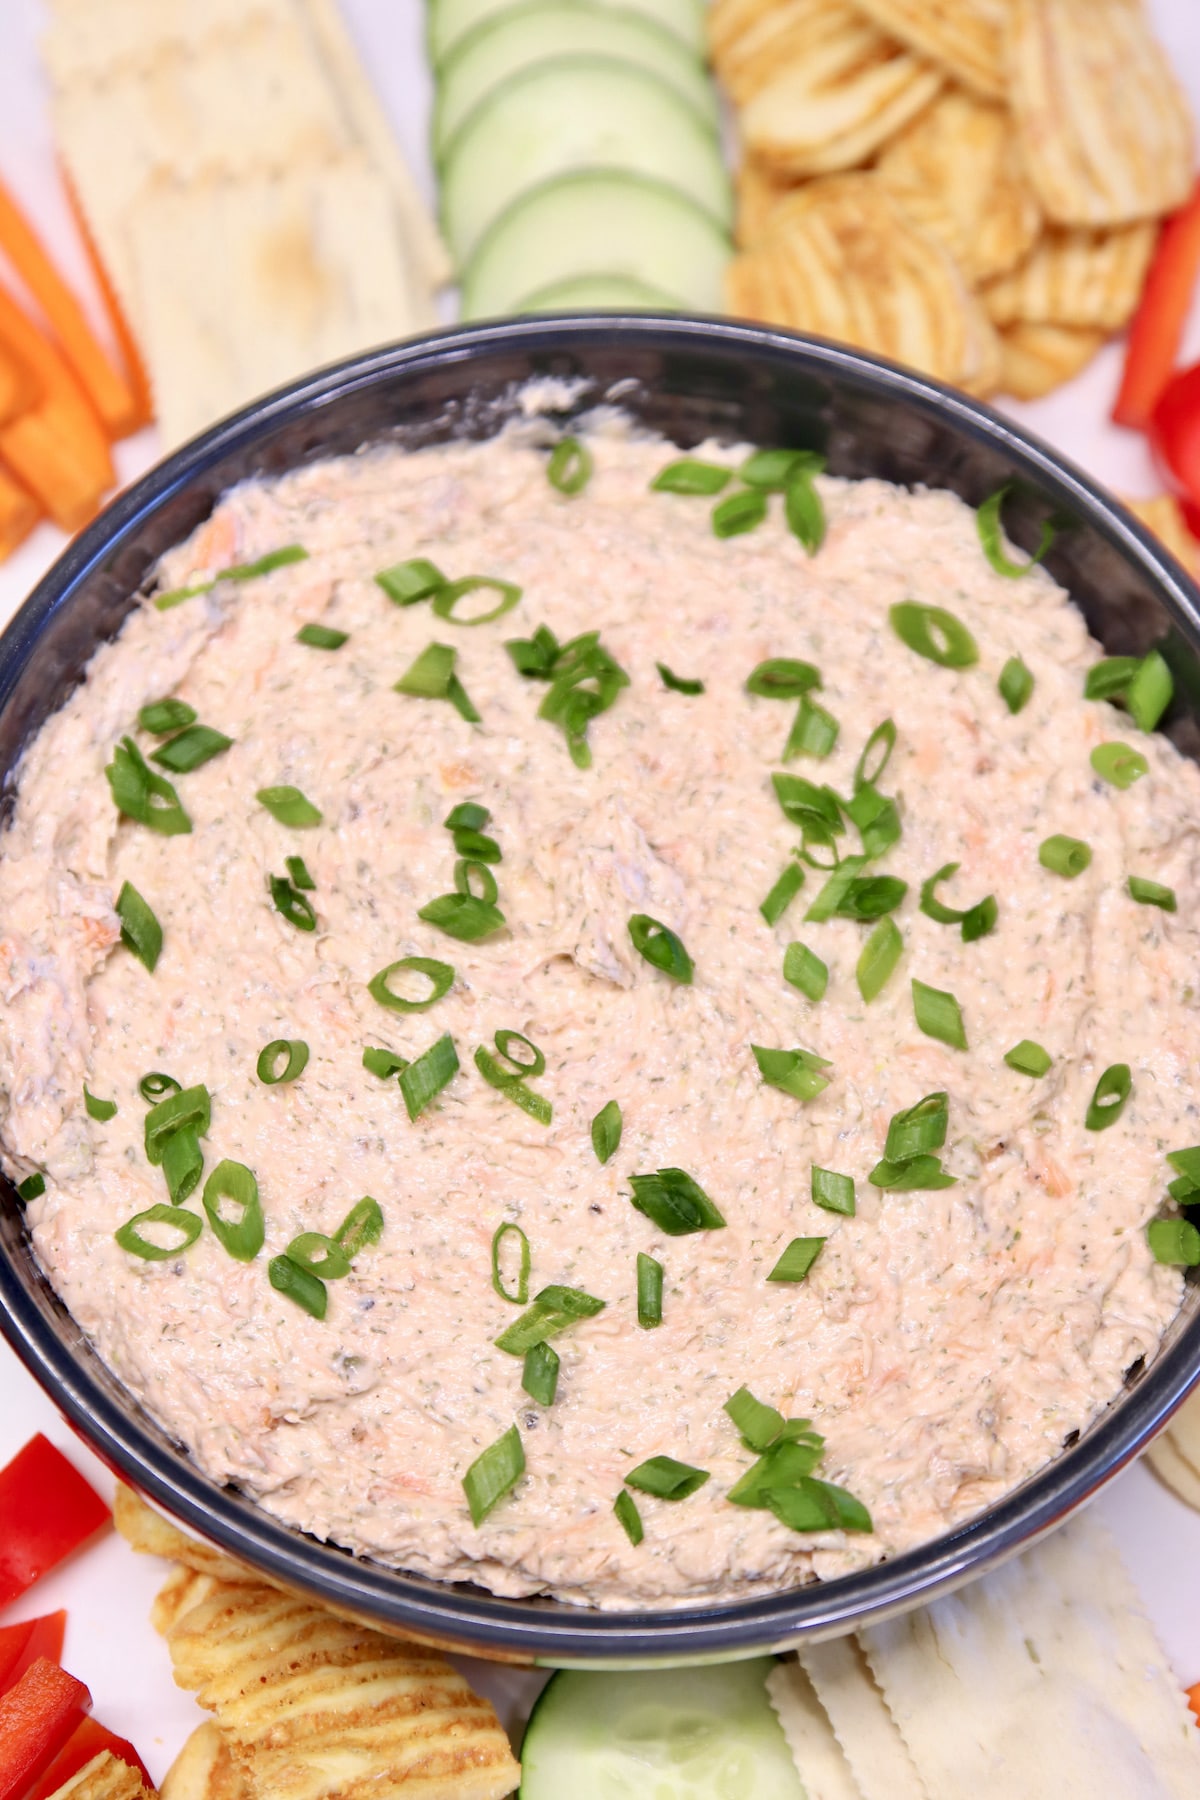 Salmon Dip in a bowl on a vegetable platter.